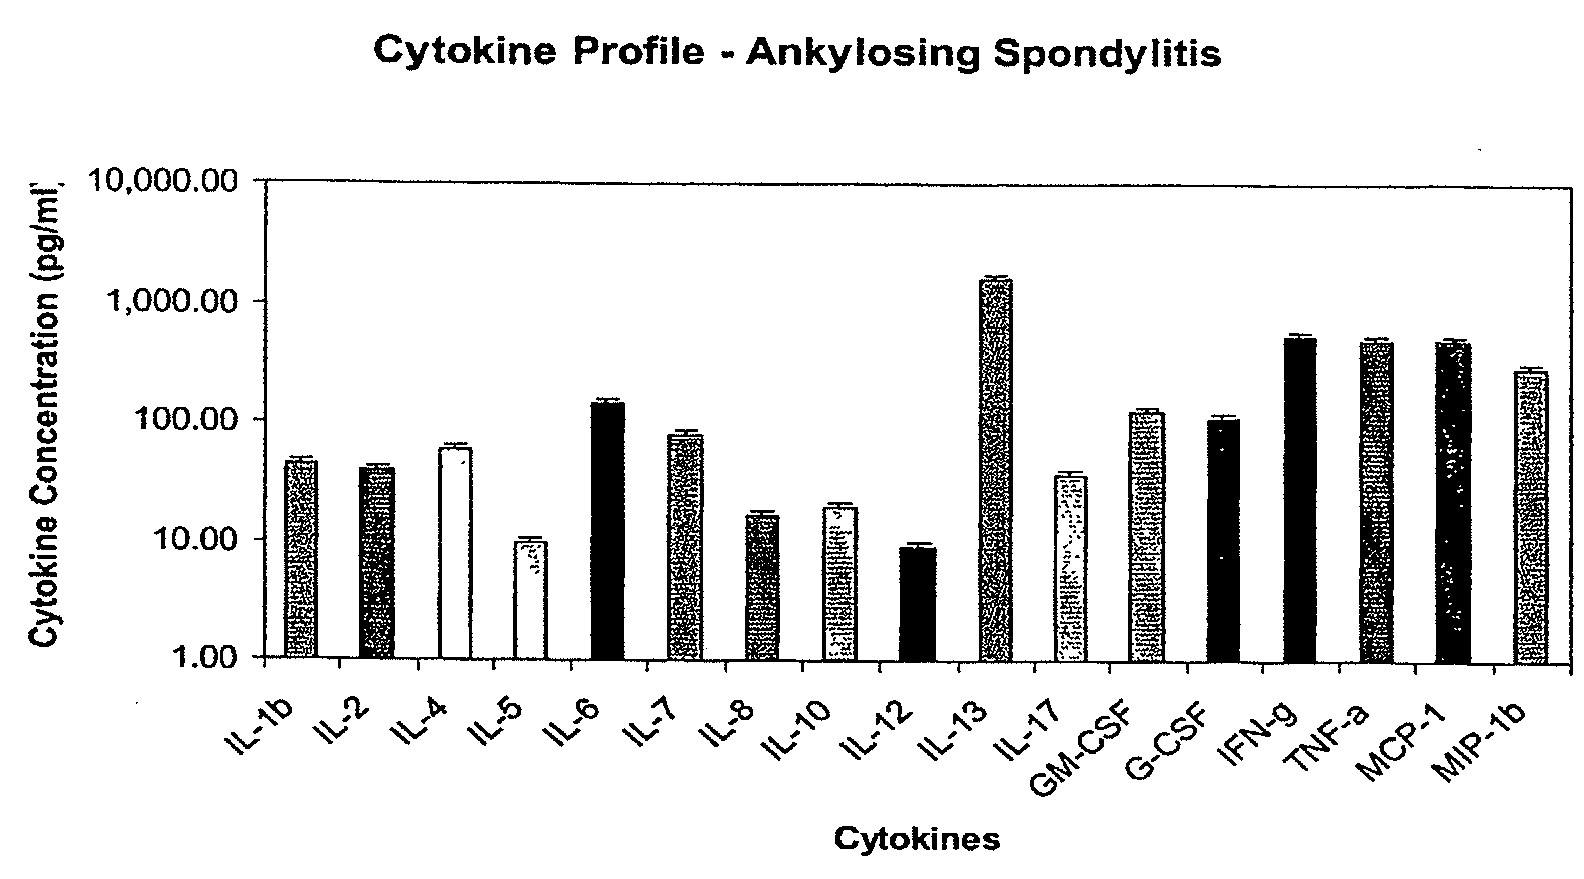 Method of using cytokine assay to diagnose, treat, and evaluate inflammatory and autoimmune diseases